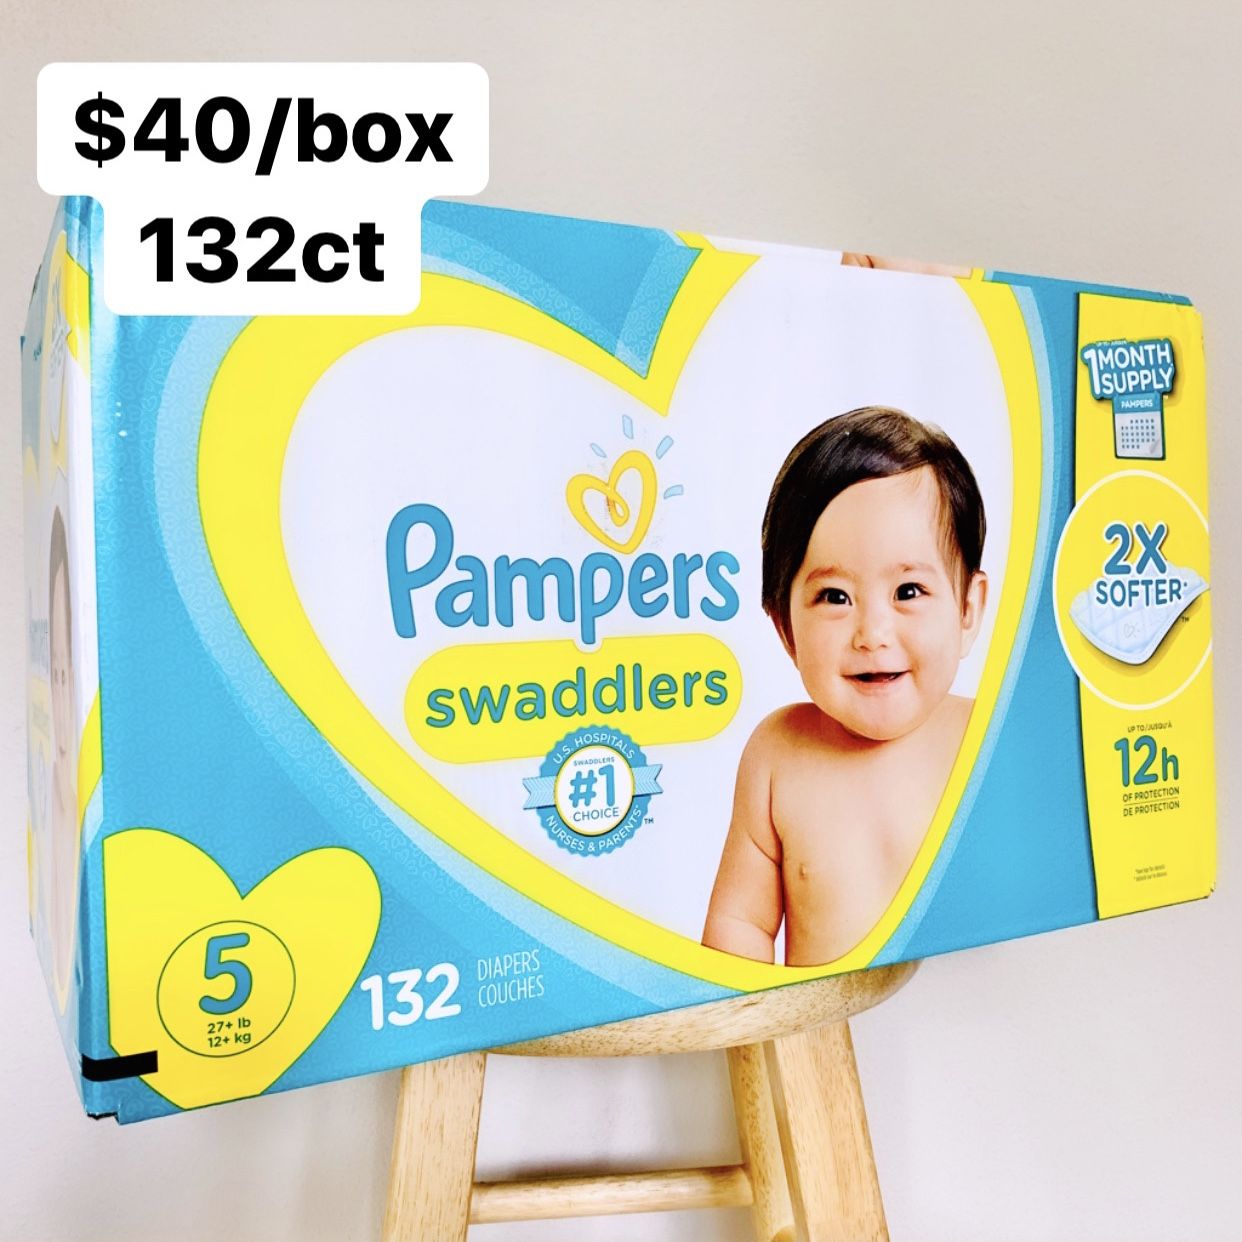 Size 5 (27+ lbs) Pampers Swaddlers (132 baby diapers) *PROMO* BUY ANY 2 PAMPERS BRAND BIG BOXES, GET 1 FREE HUGGIES TUB 64ct